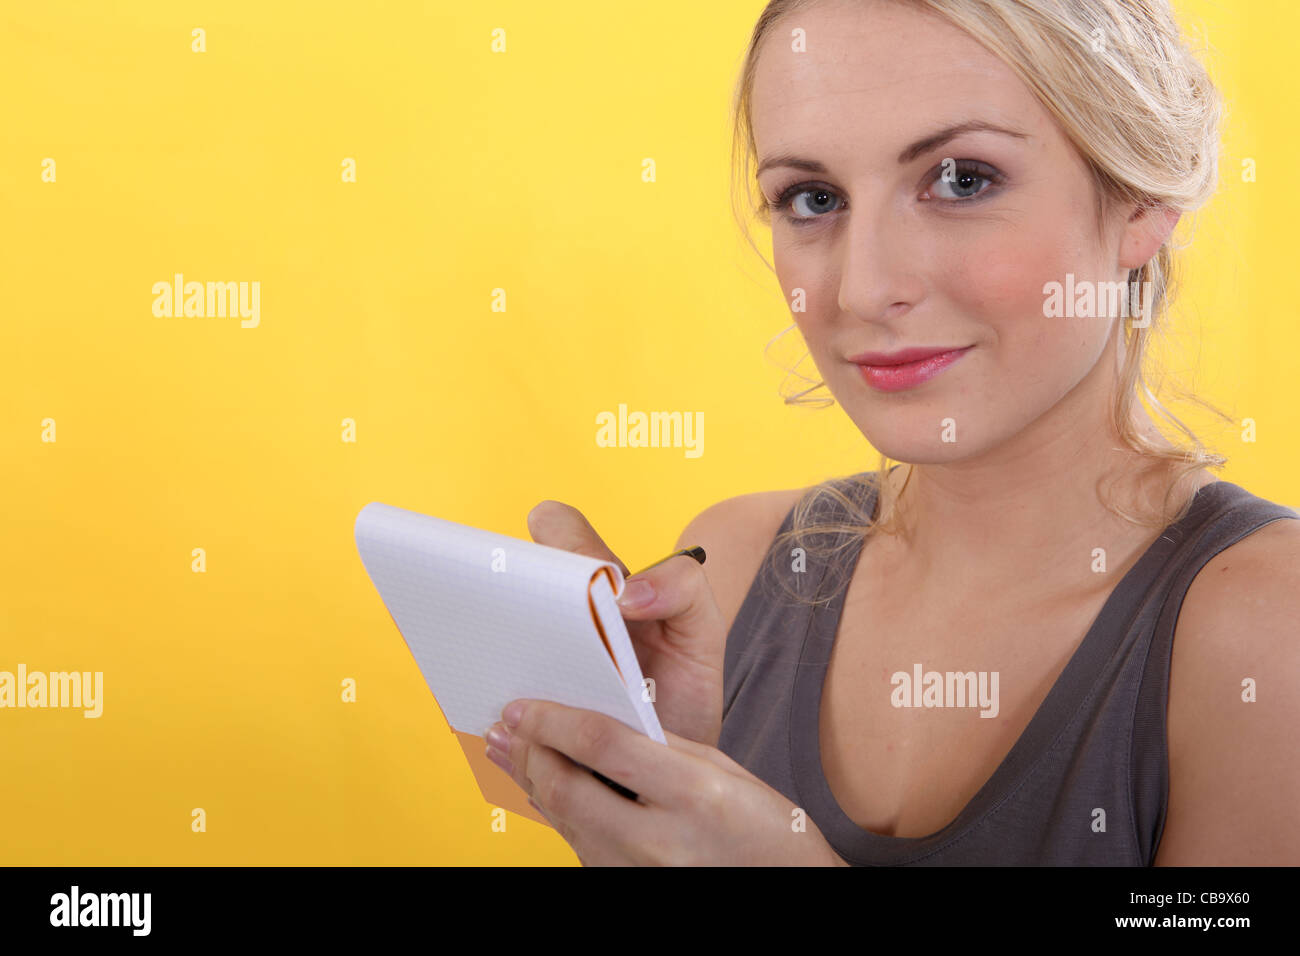 portrait of a woman with shopping list Stock Photo